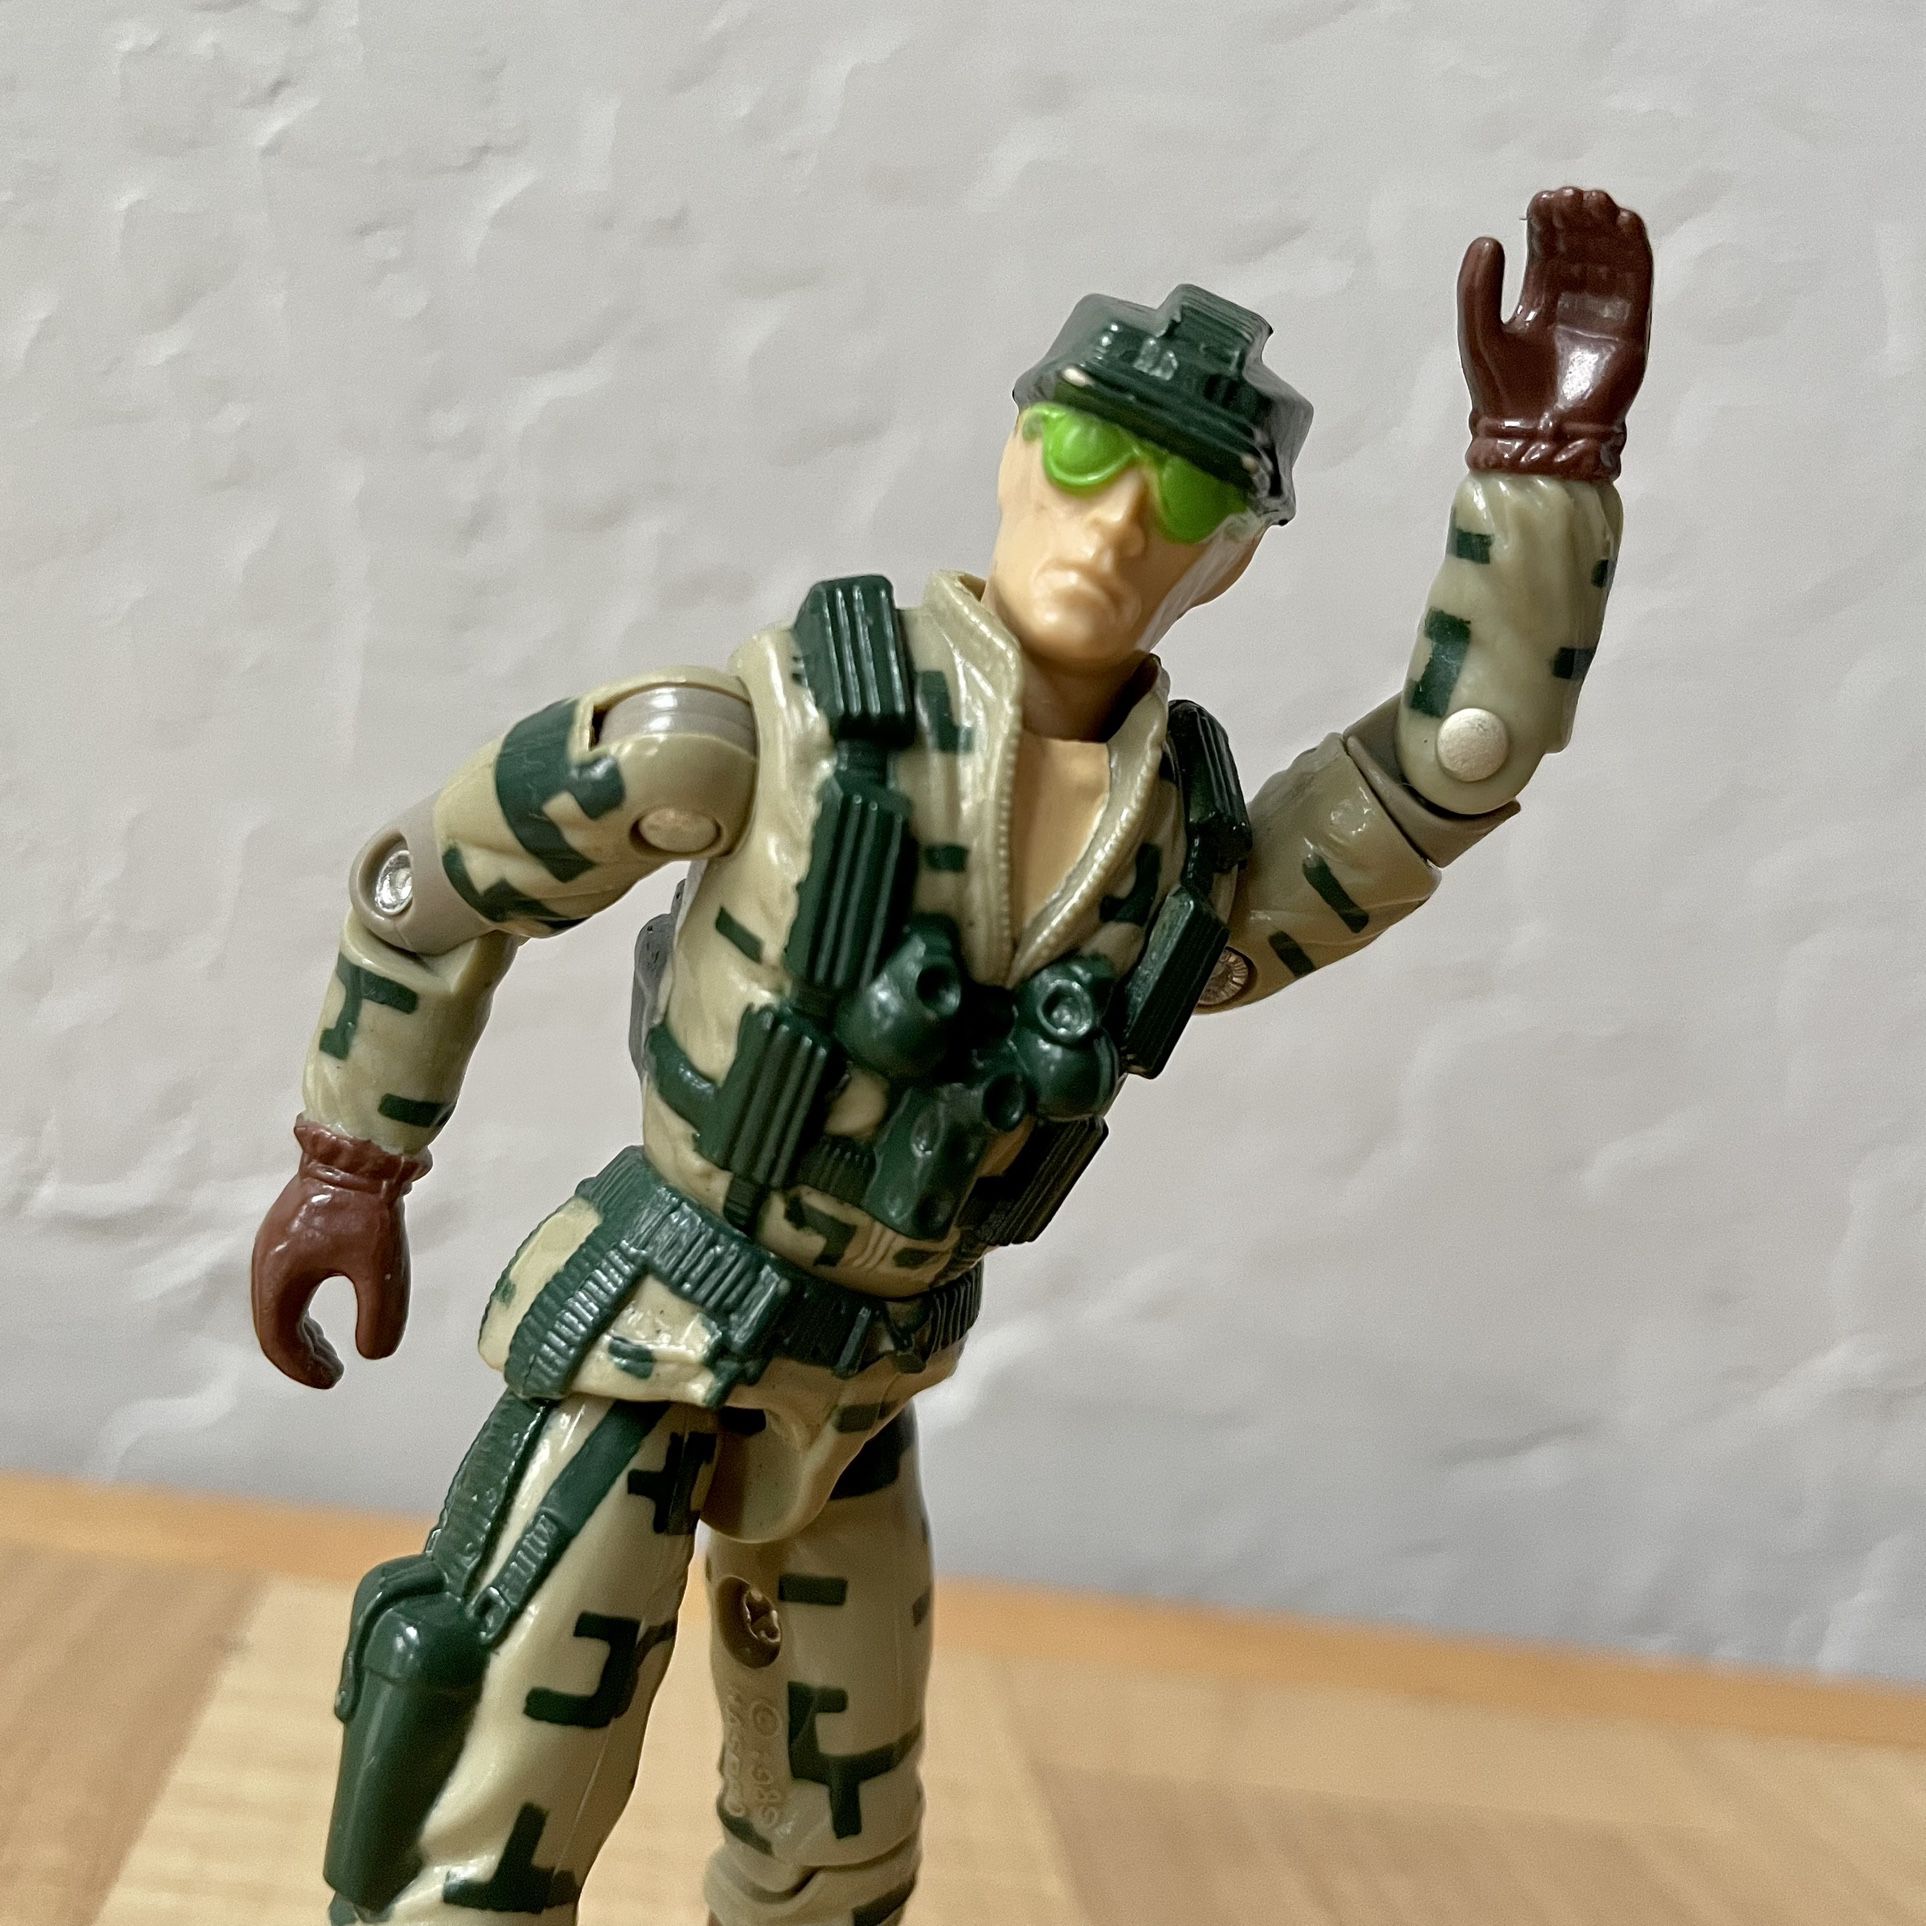 Vintage 1989 G.I. Joe Recoil Action Figure With One Accessory Weapon Collectible Toy